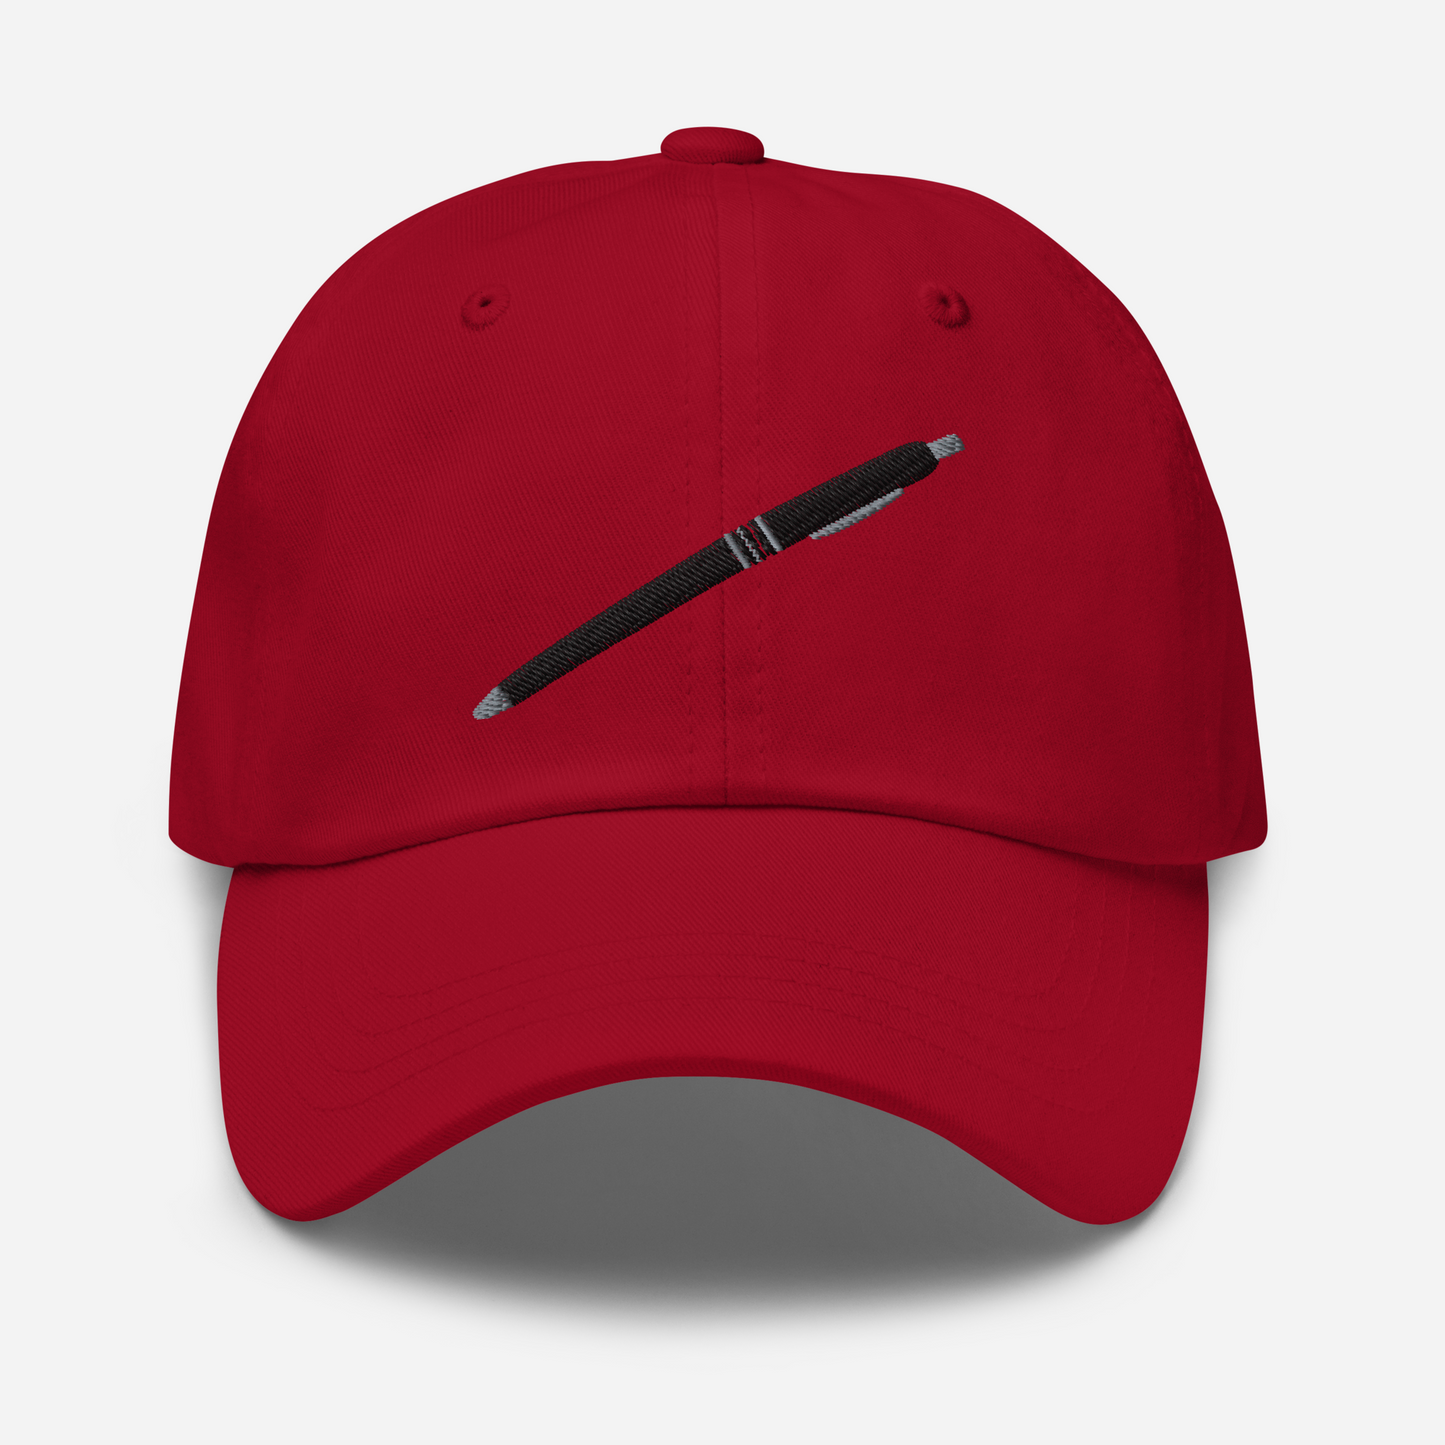 US government issue pen dad hat